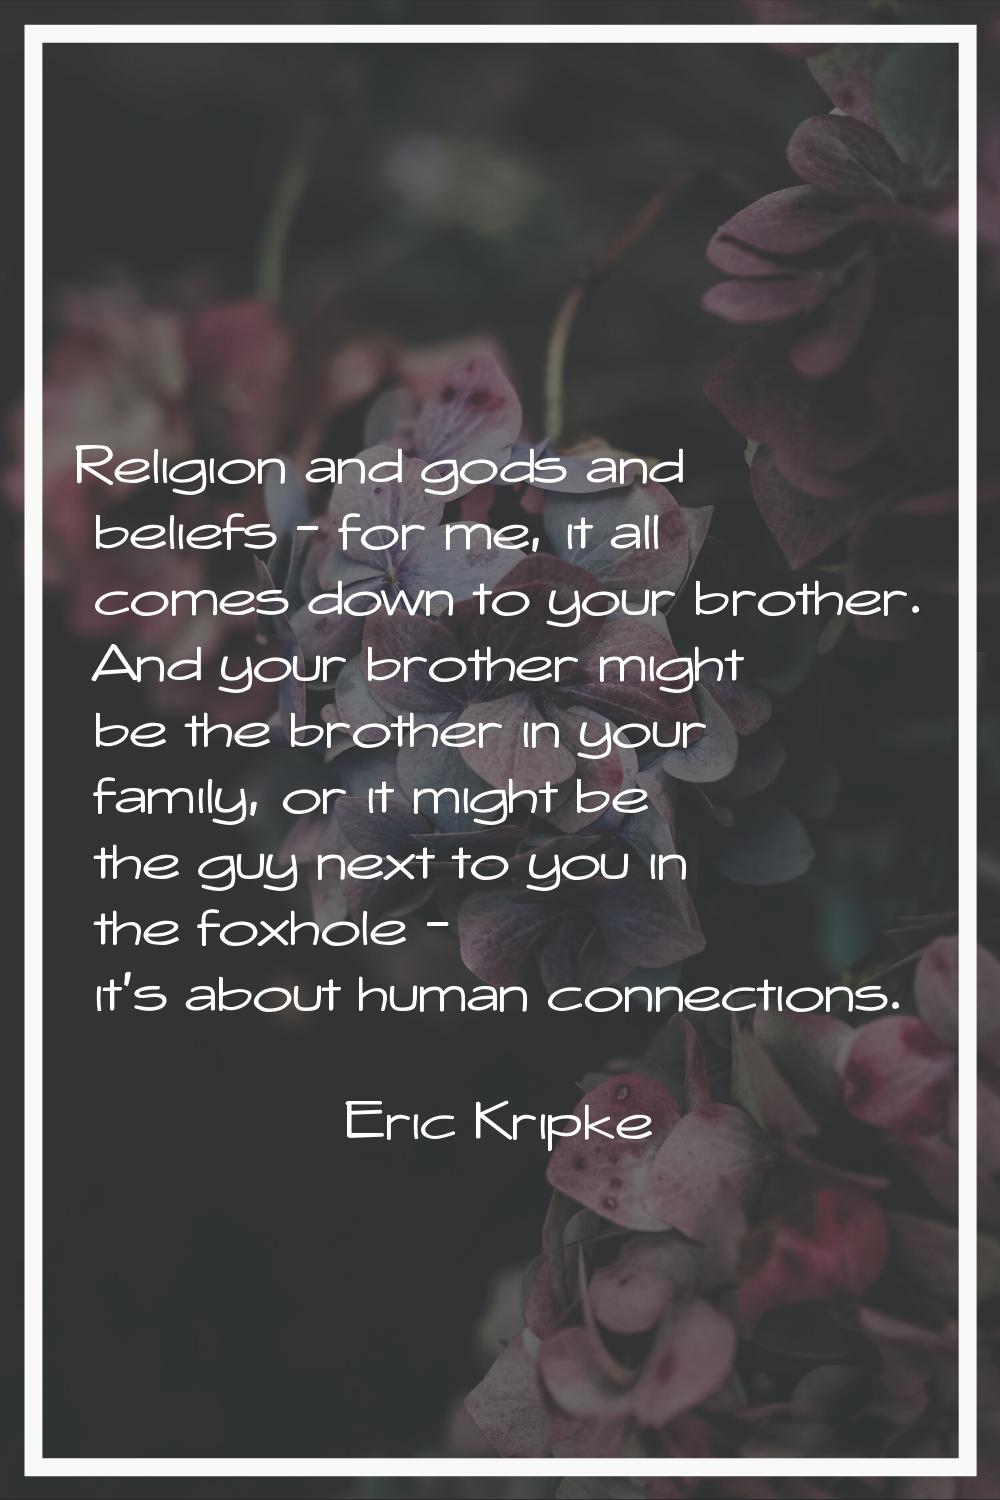 Religion and gods and beliefs - for me, it all comes down to your brother. And your brother might b